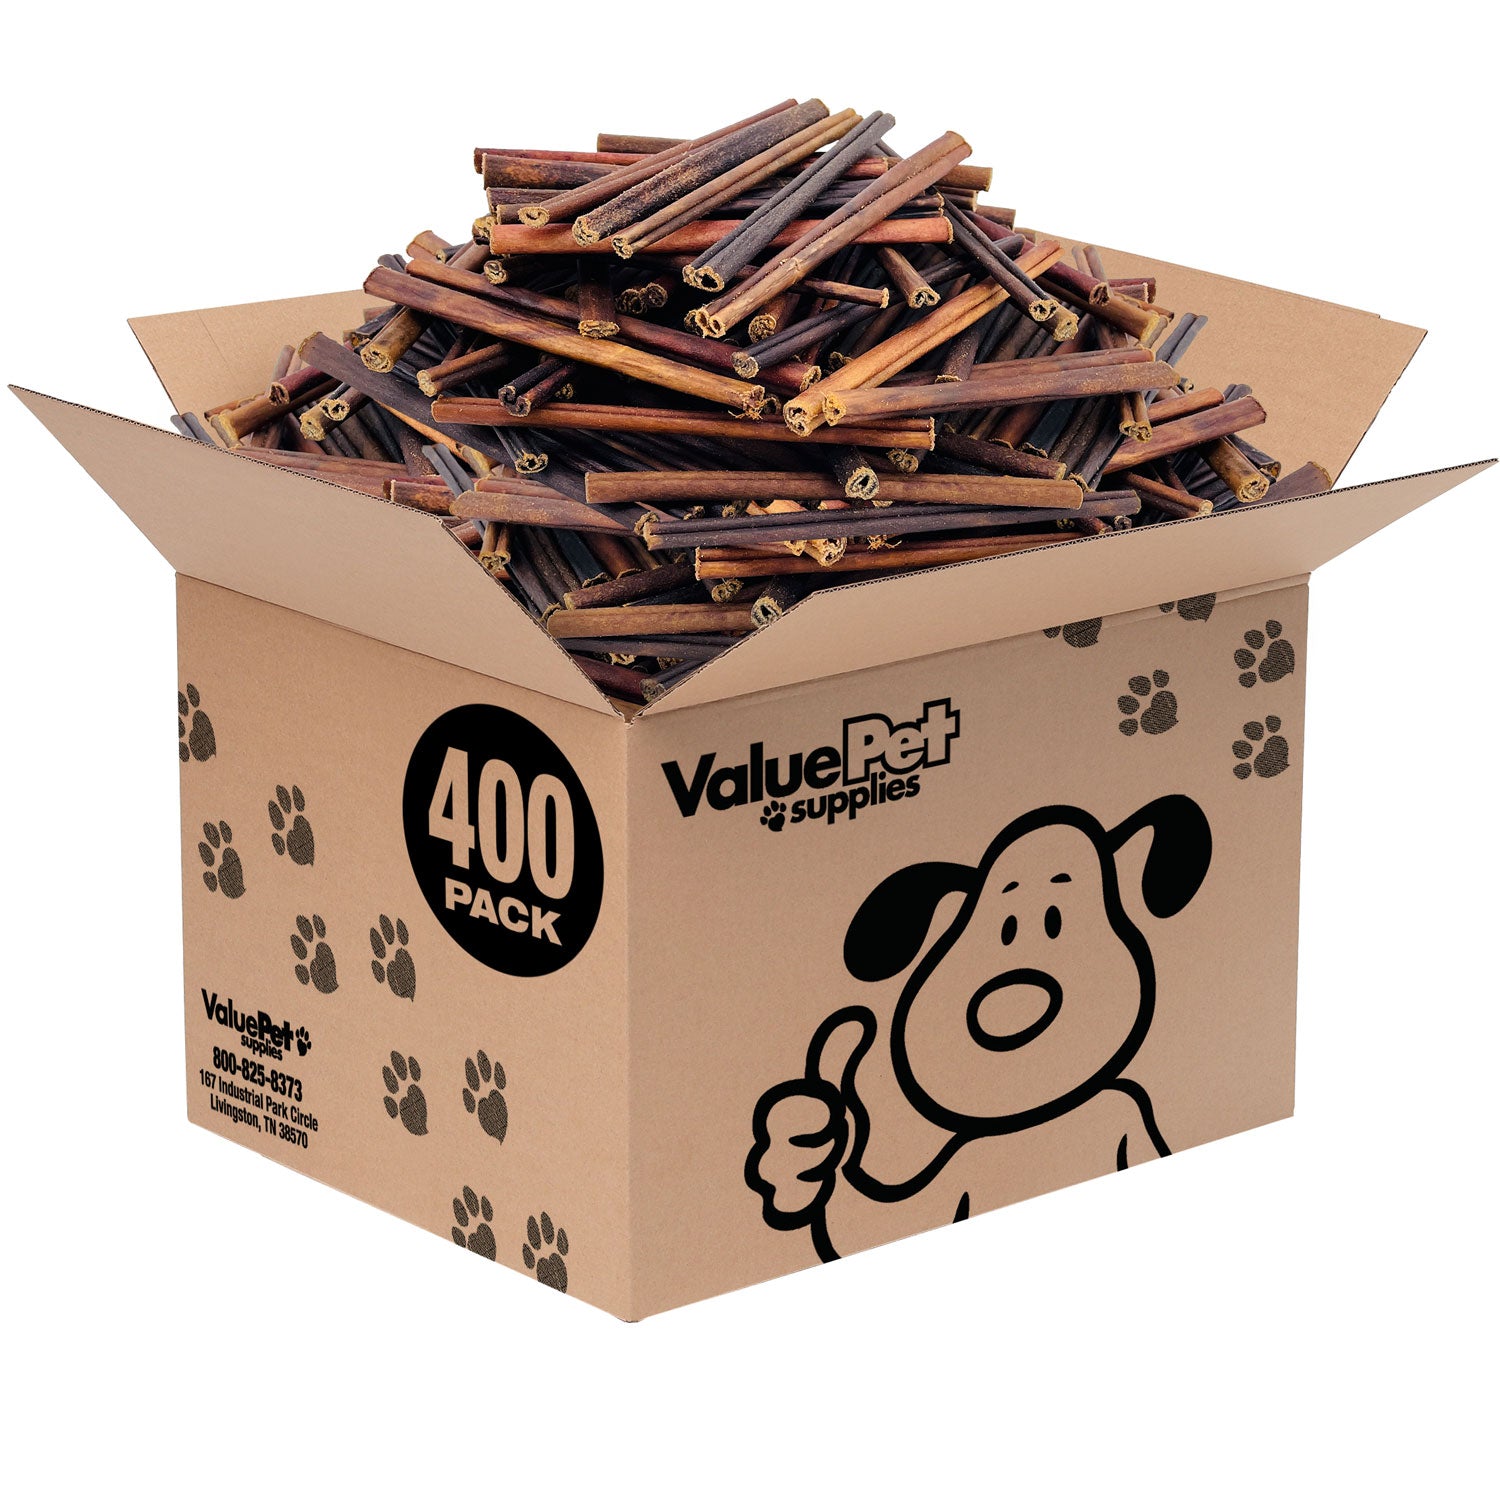 ValueBull USA Collagen Sticks, Premium Beef Small Dog Chews, 6" Extra Thin, 400 Count WHOLESALE PACK